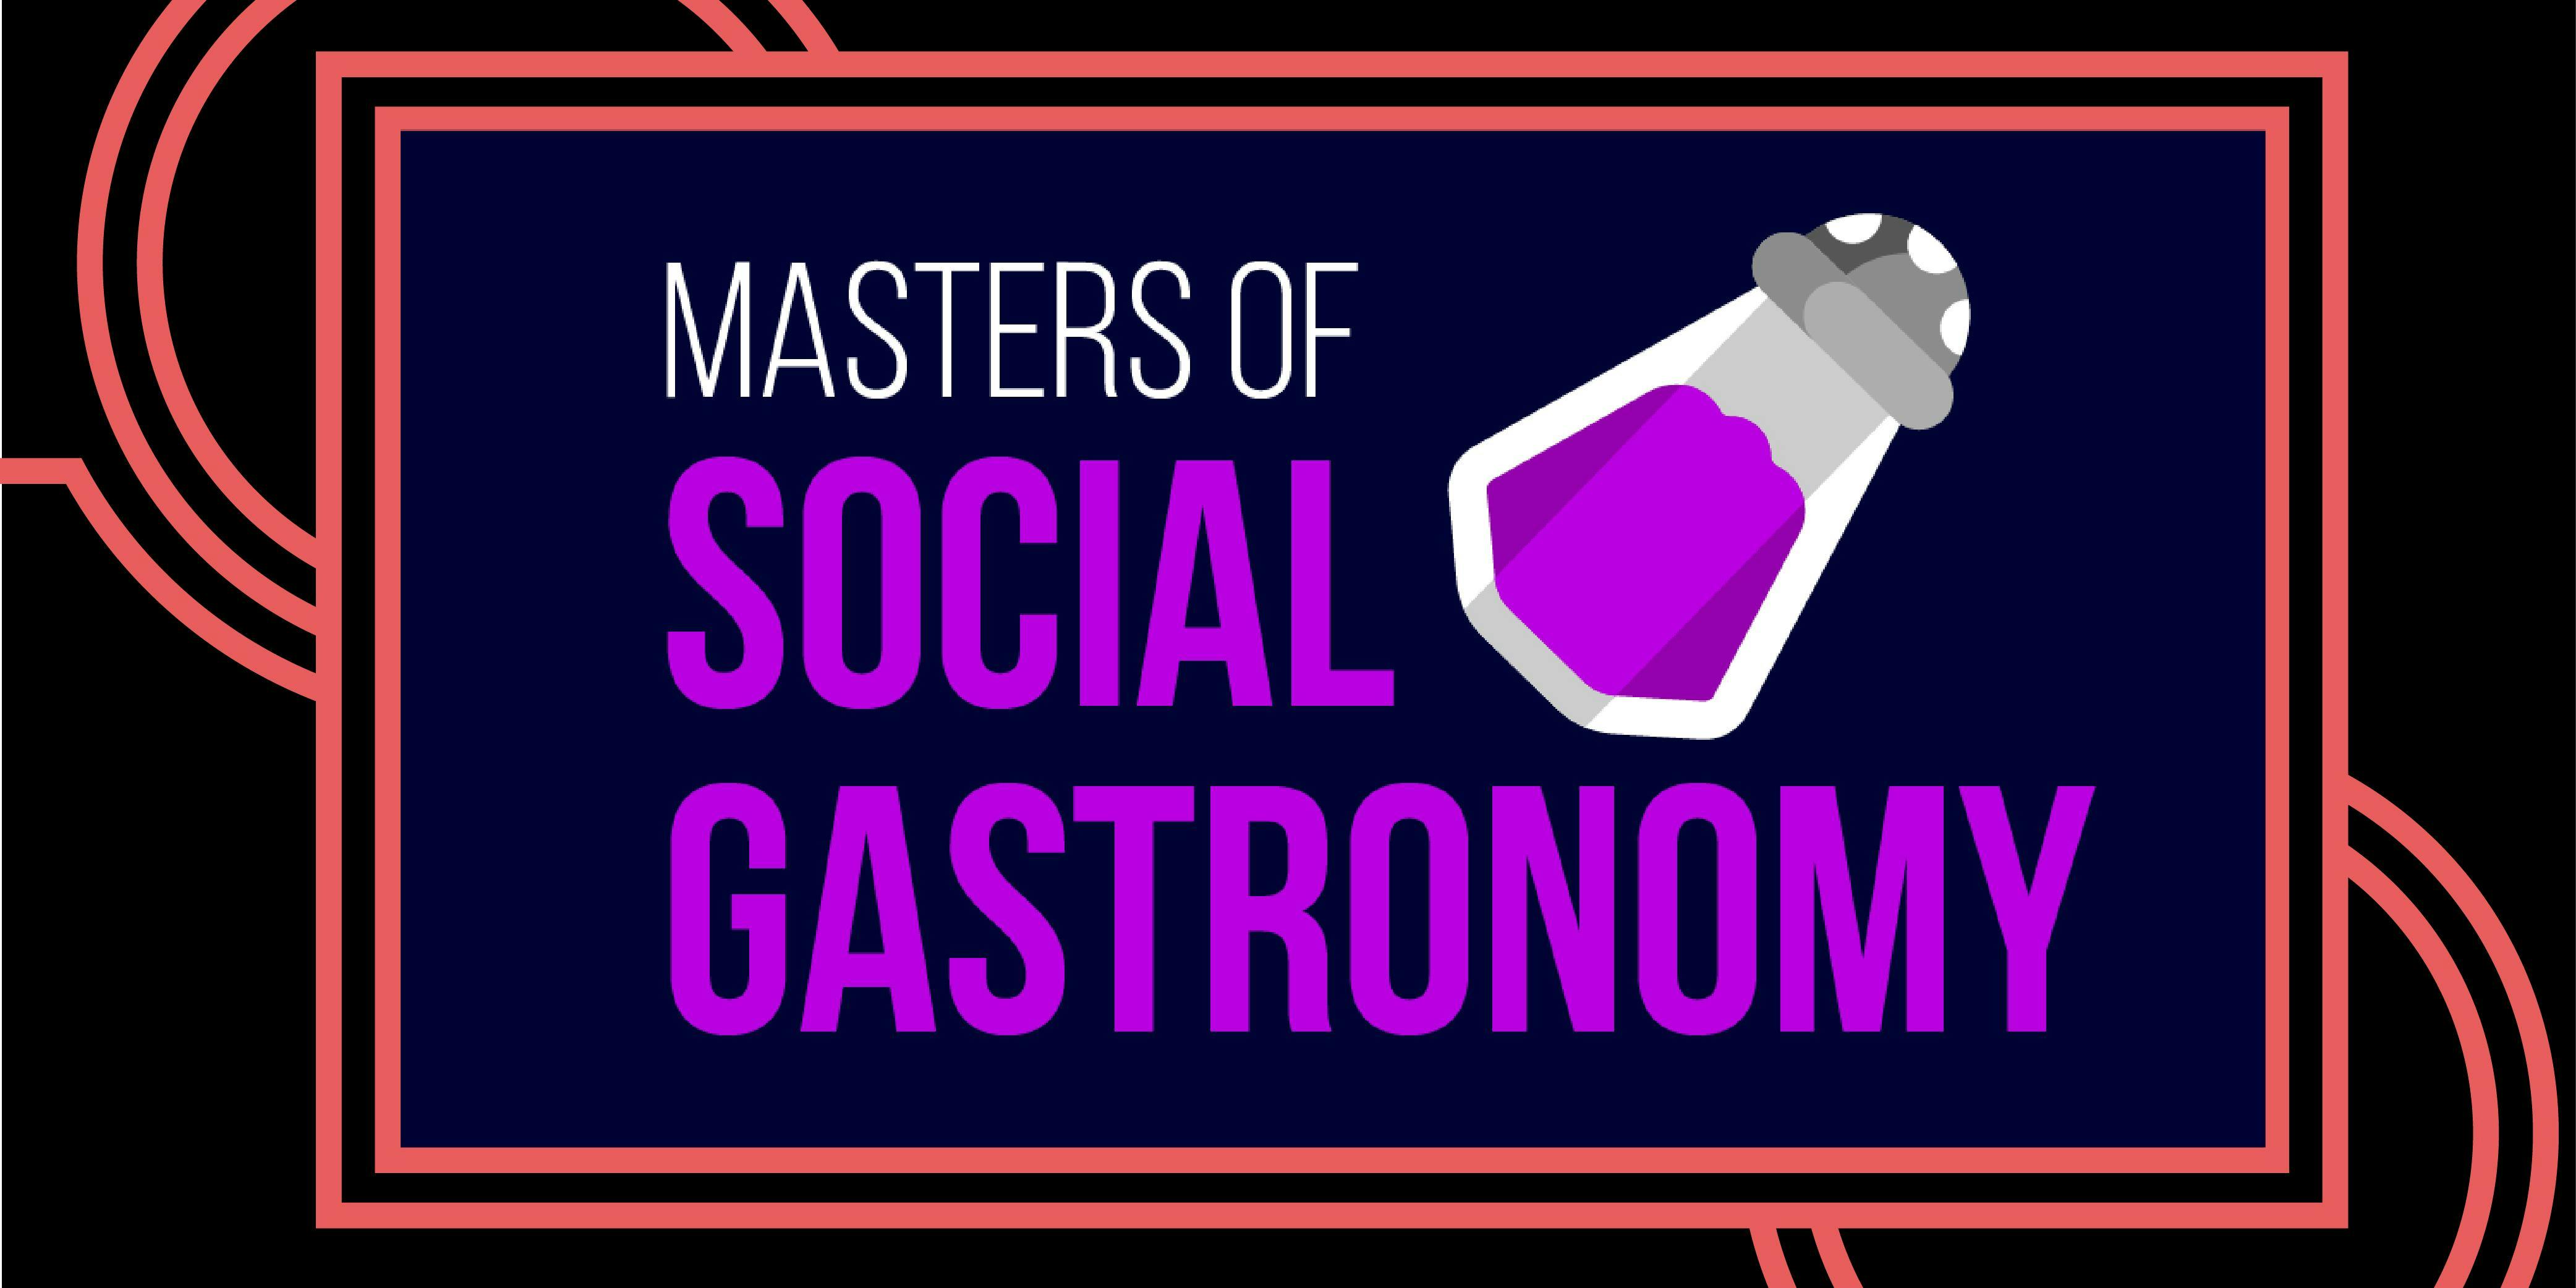 Masters of Social Gastronomy: The Secrets of FAKE MEAT!